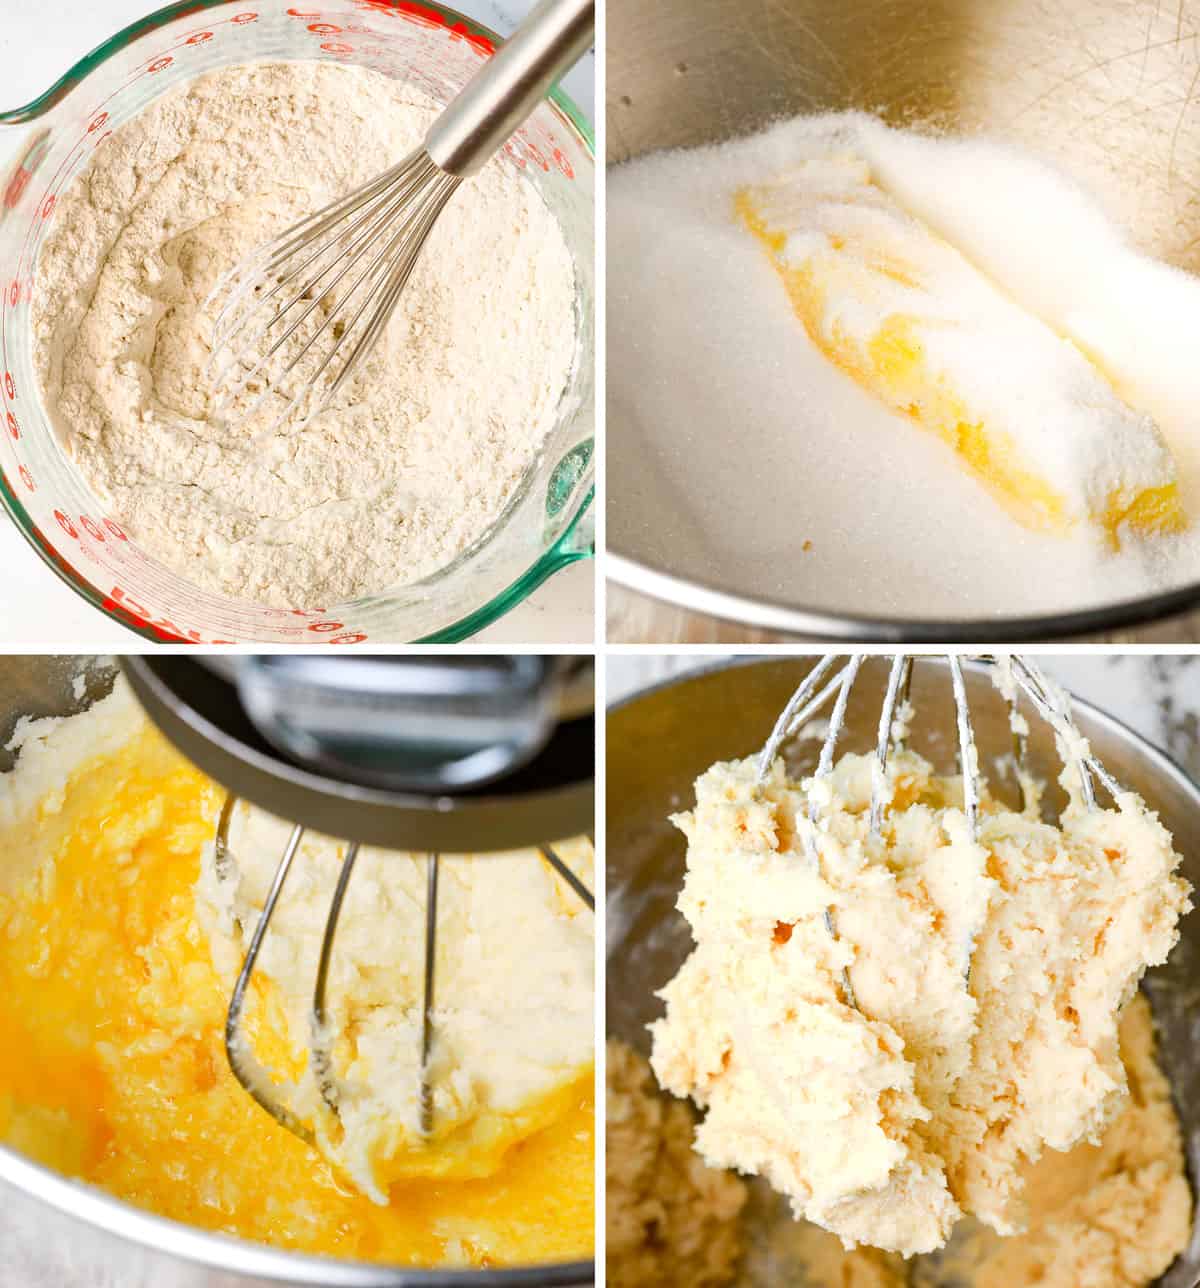 a collage showing how to make sugar cookie bars by 1) mixing dry ingredients together, 2) creaming butter and sugar, 3) beating in eggs and vanilla, 4) mixing until fluffy